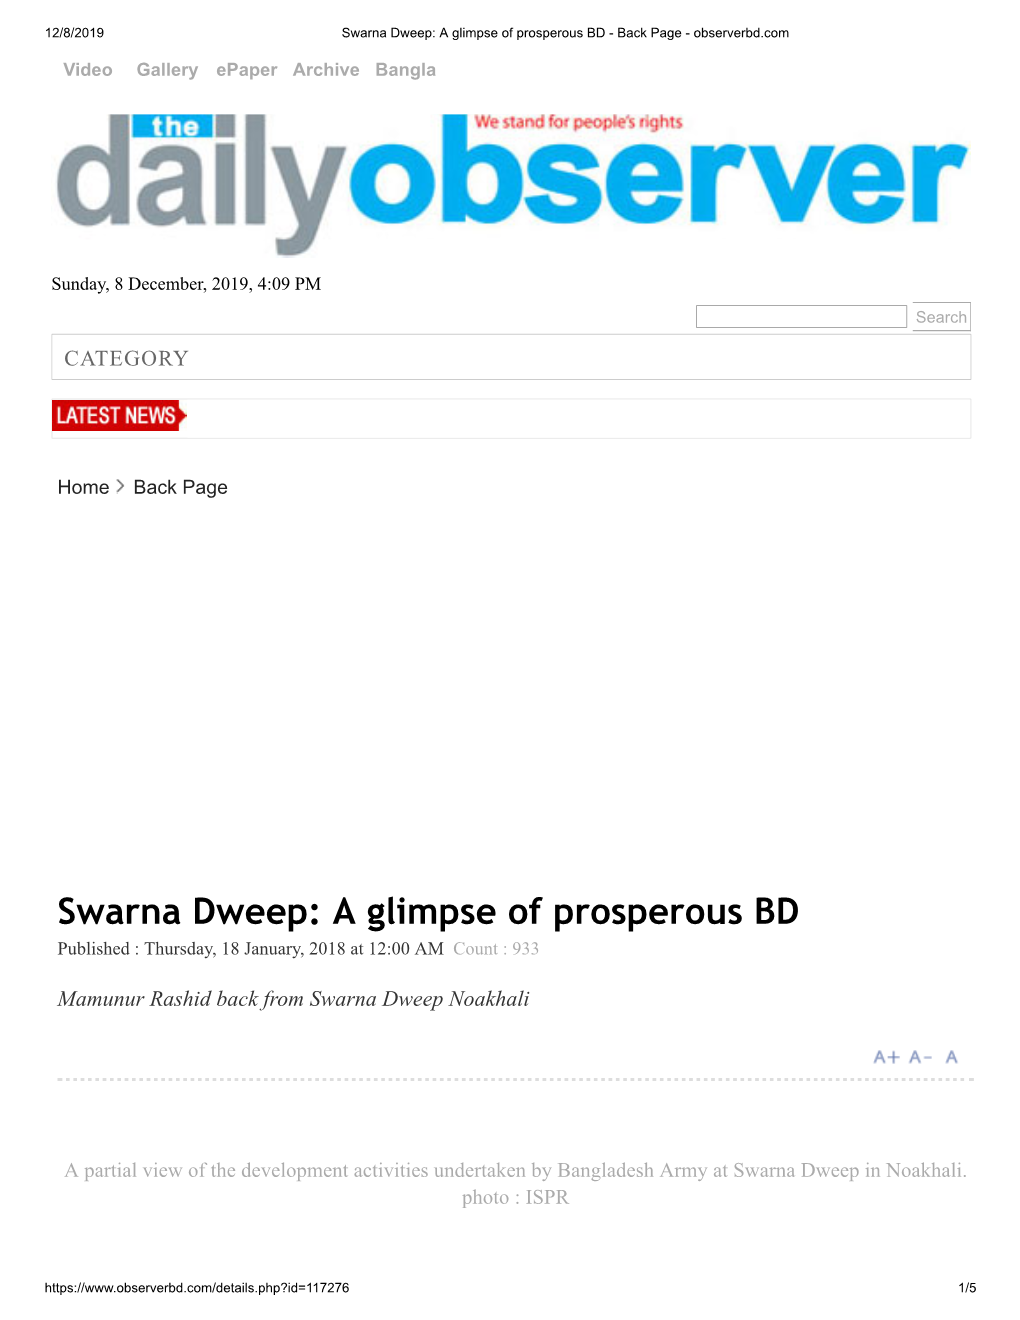 Swarna Dweep: a Glimpse of Prosperous BD - Back Page - Observerbd.Com